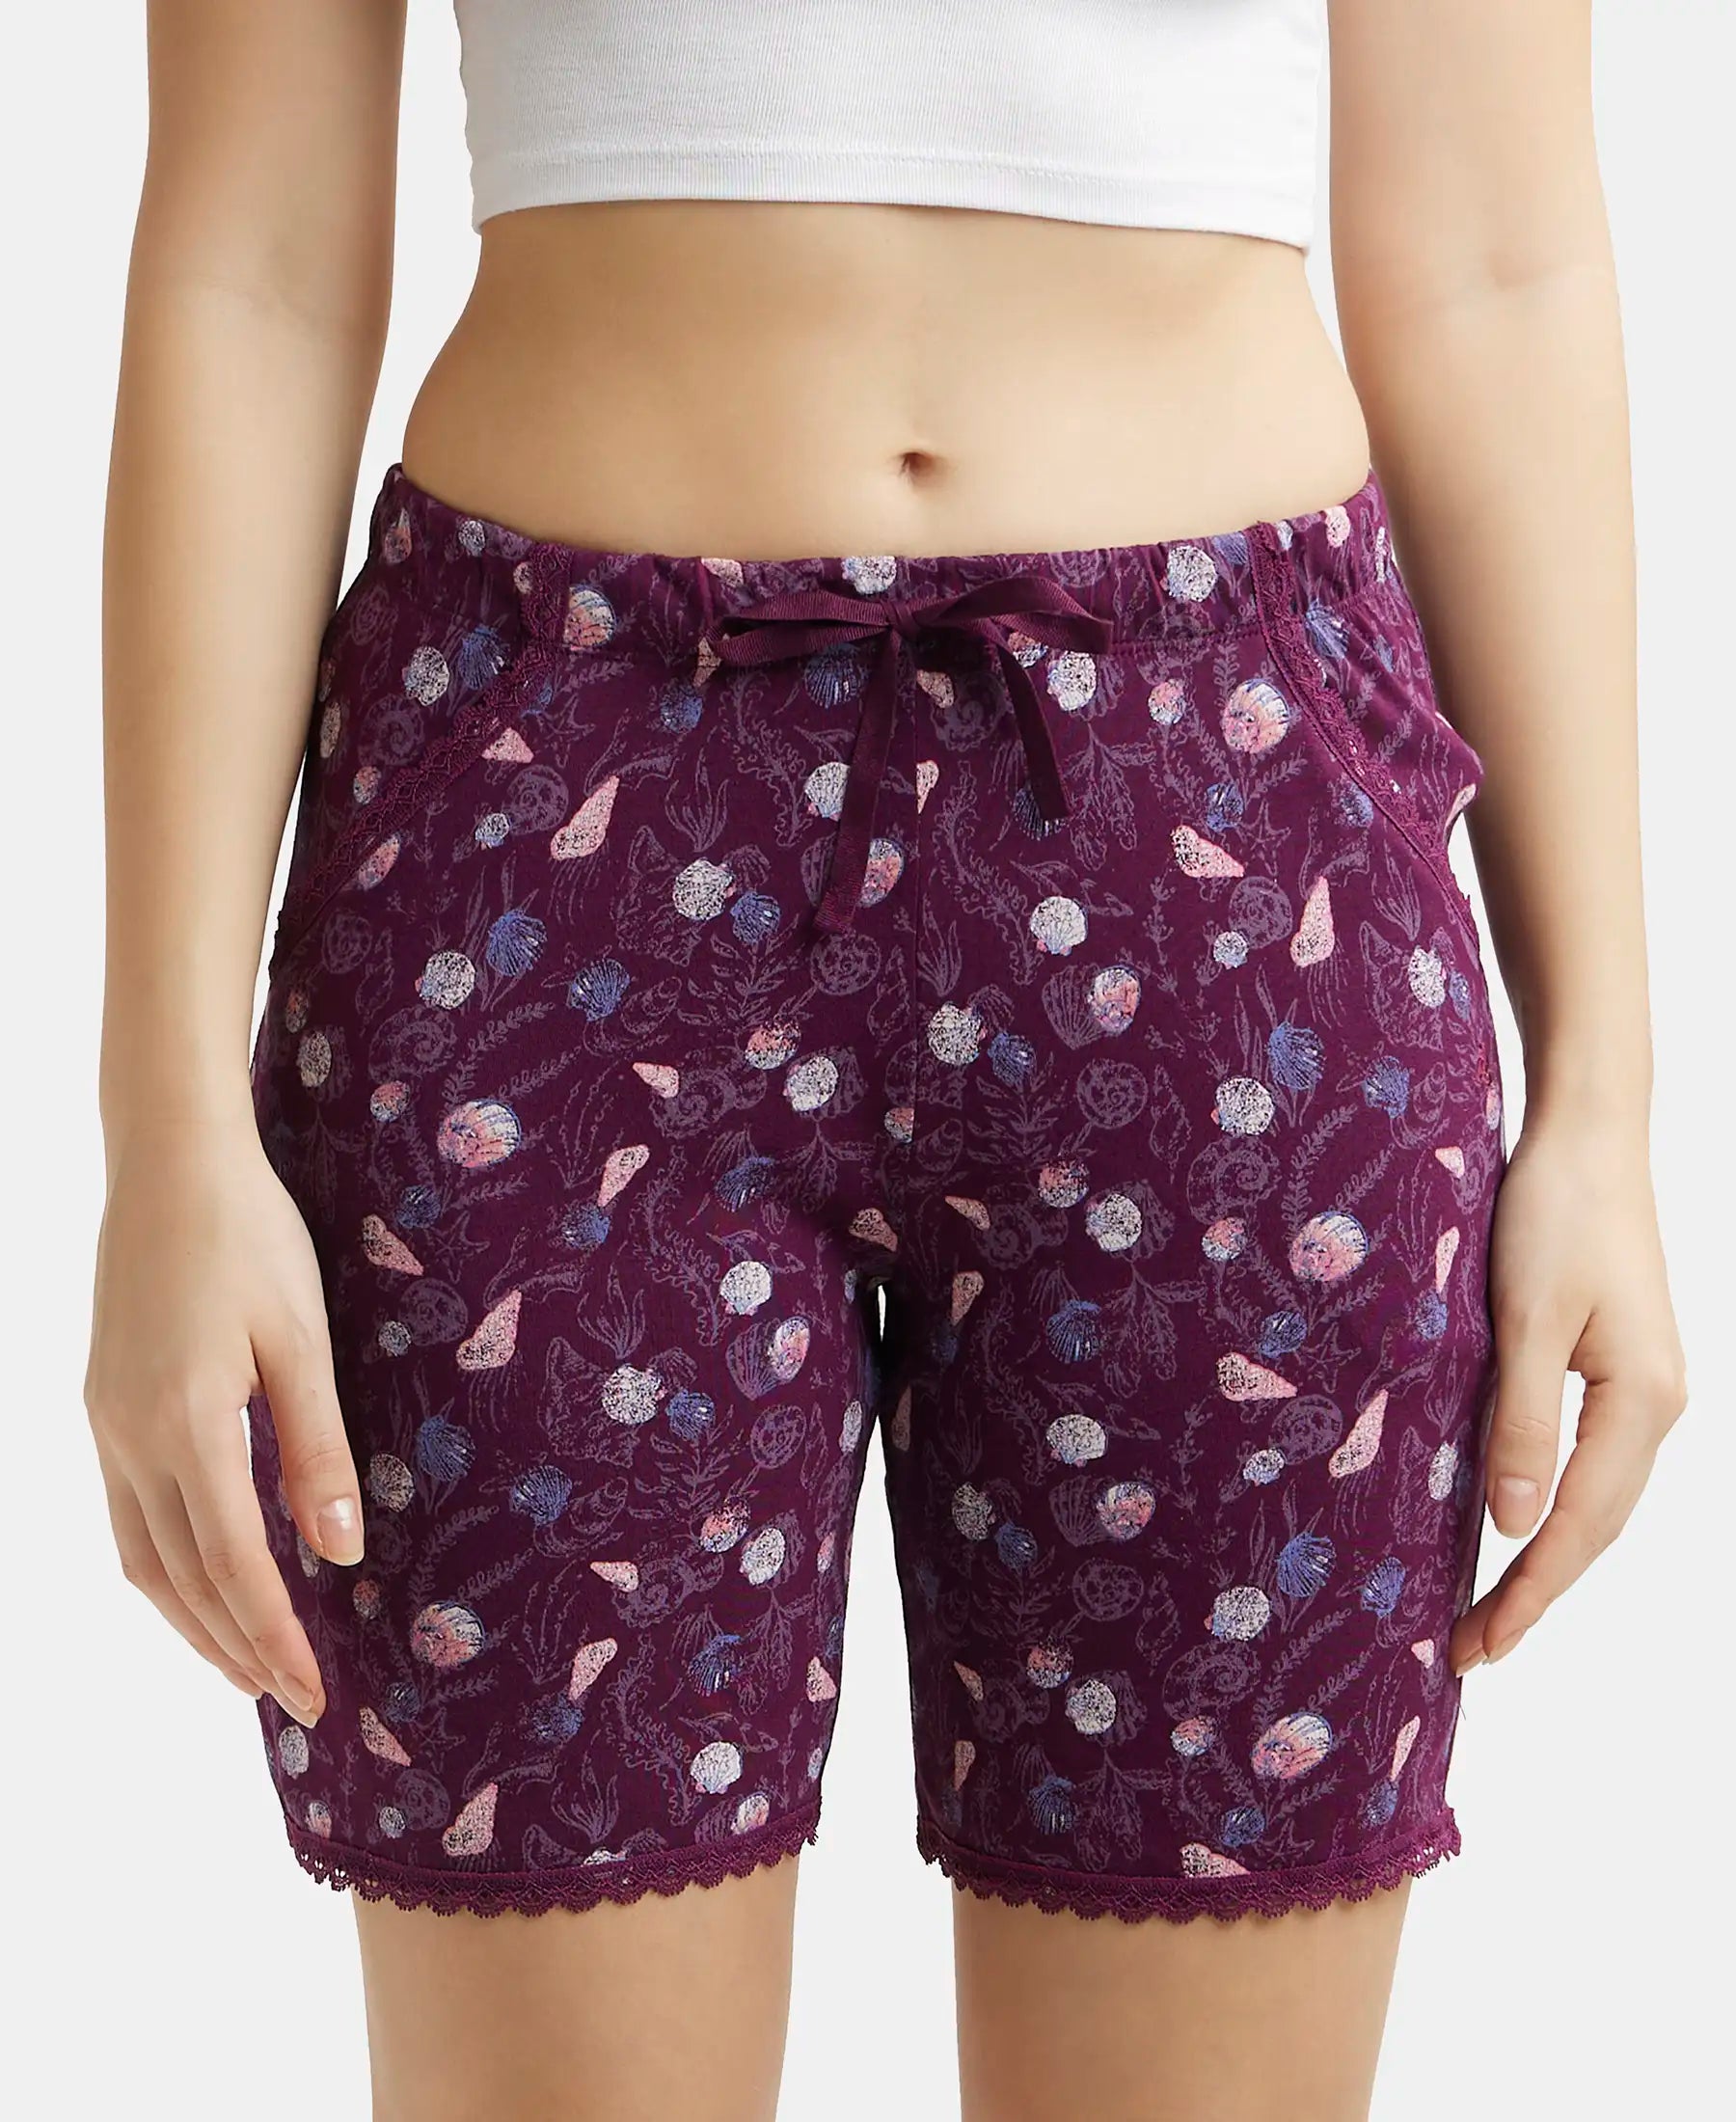 Women's Micro Modal Cotton Relaxed Fit Printed Shorts with Lace Trim Styled  Side Pockets - Infinity Blue Assorted Prints